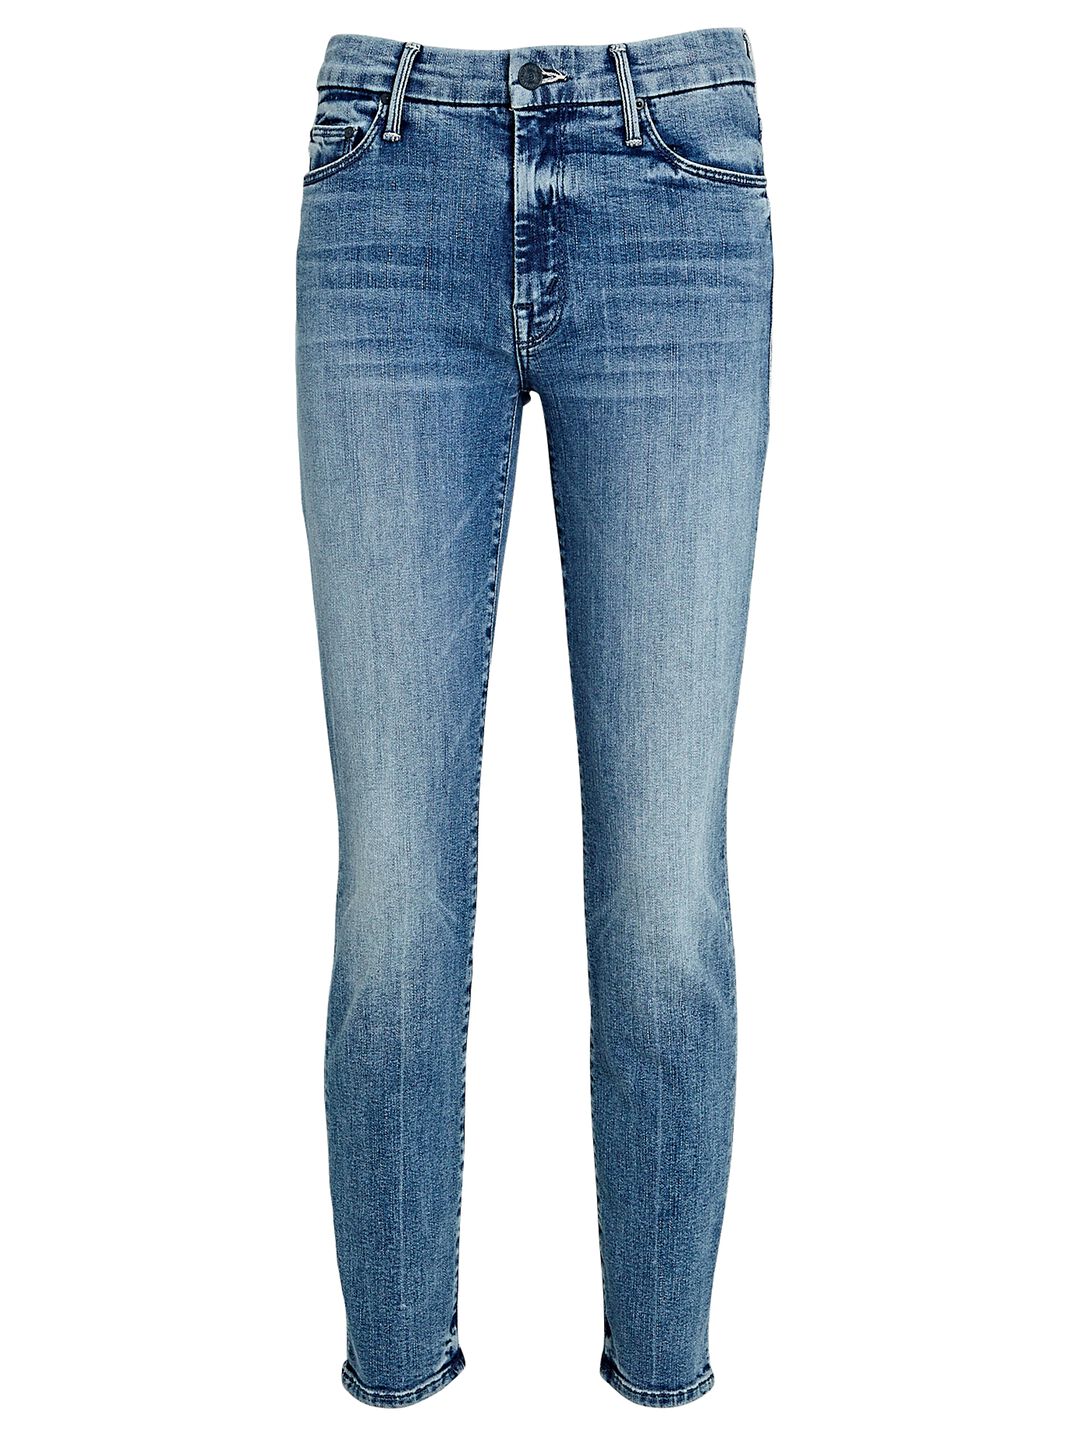 The Looker Ankle Skinny Jeans